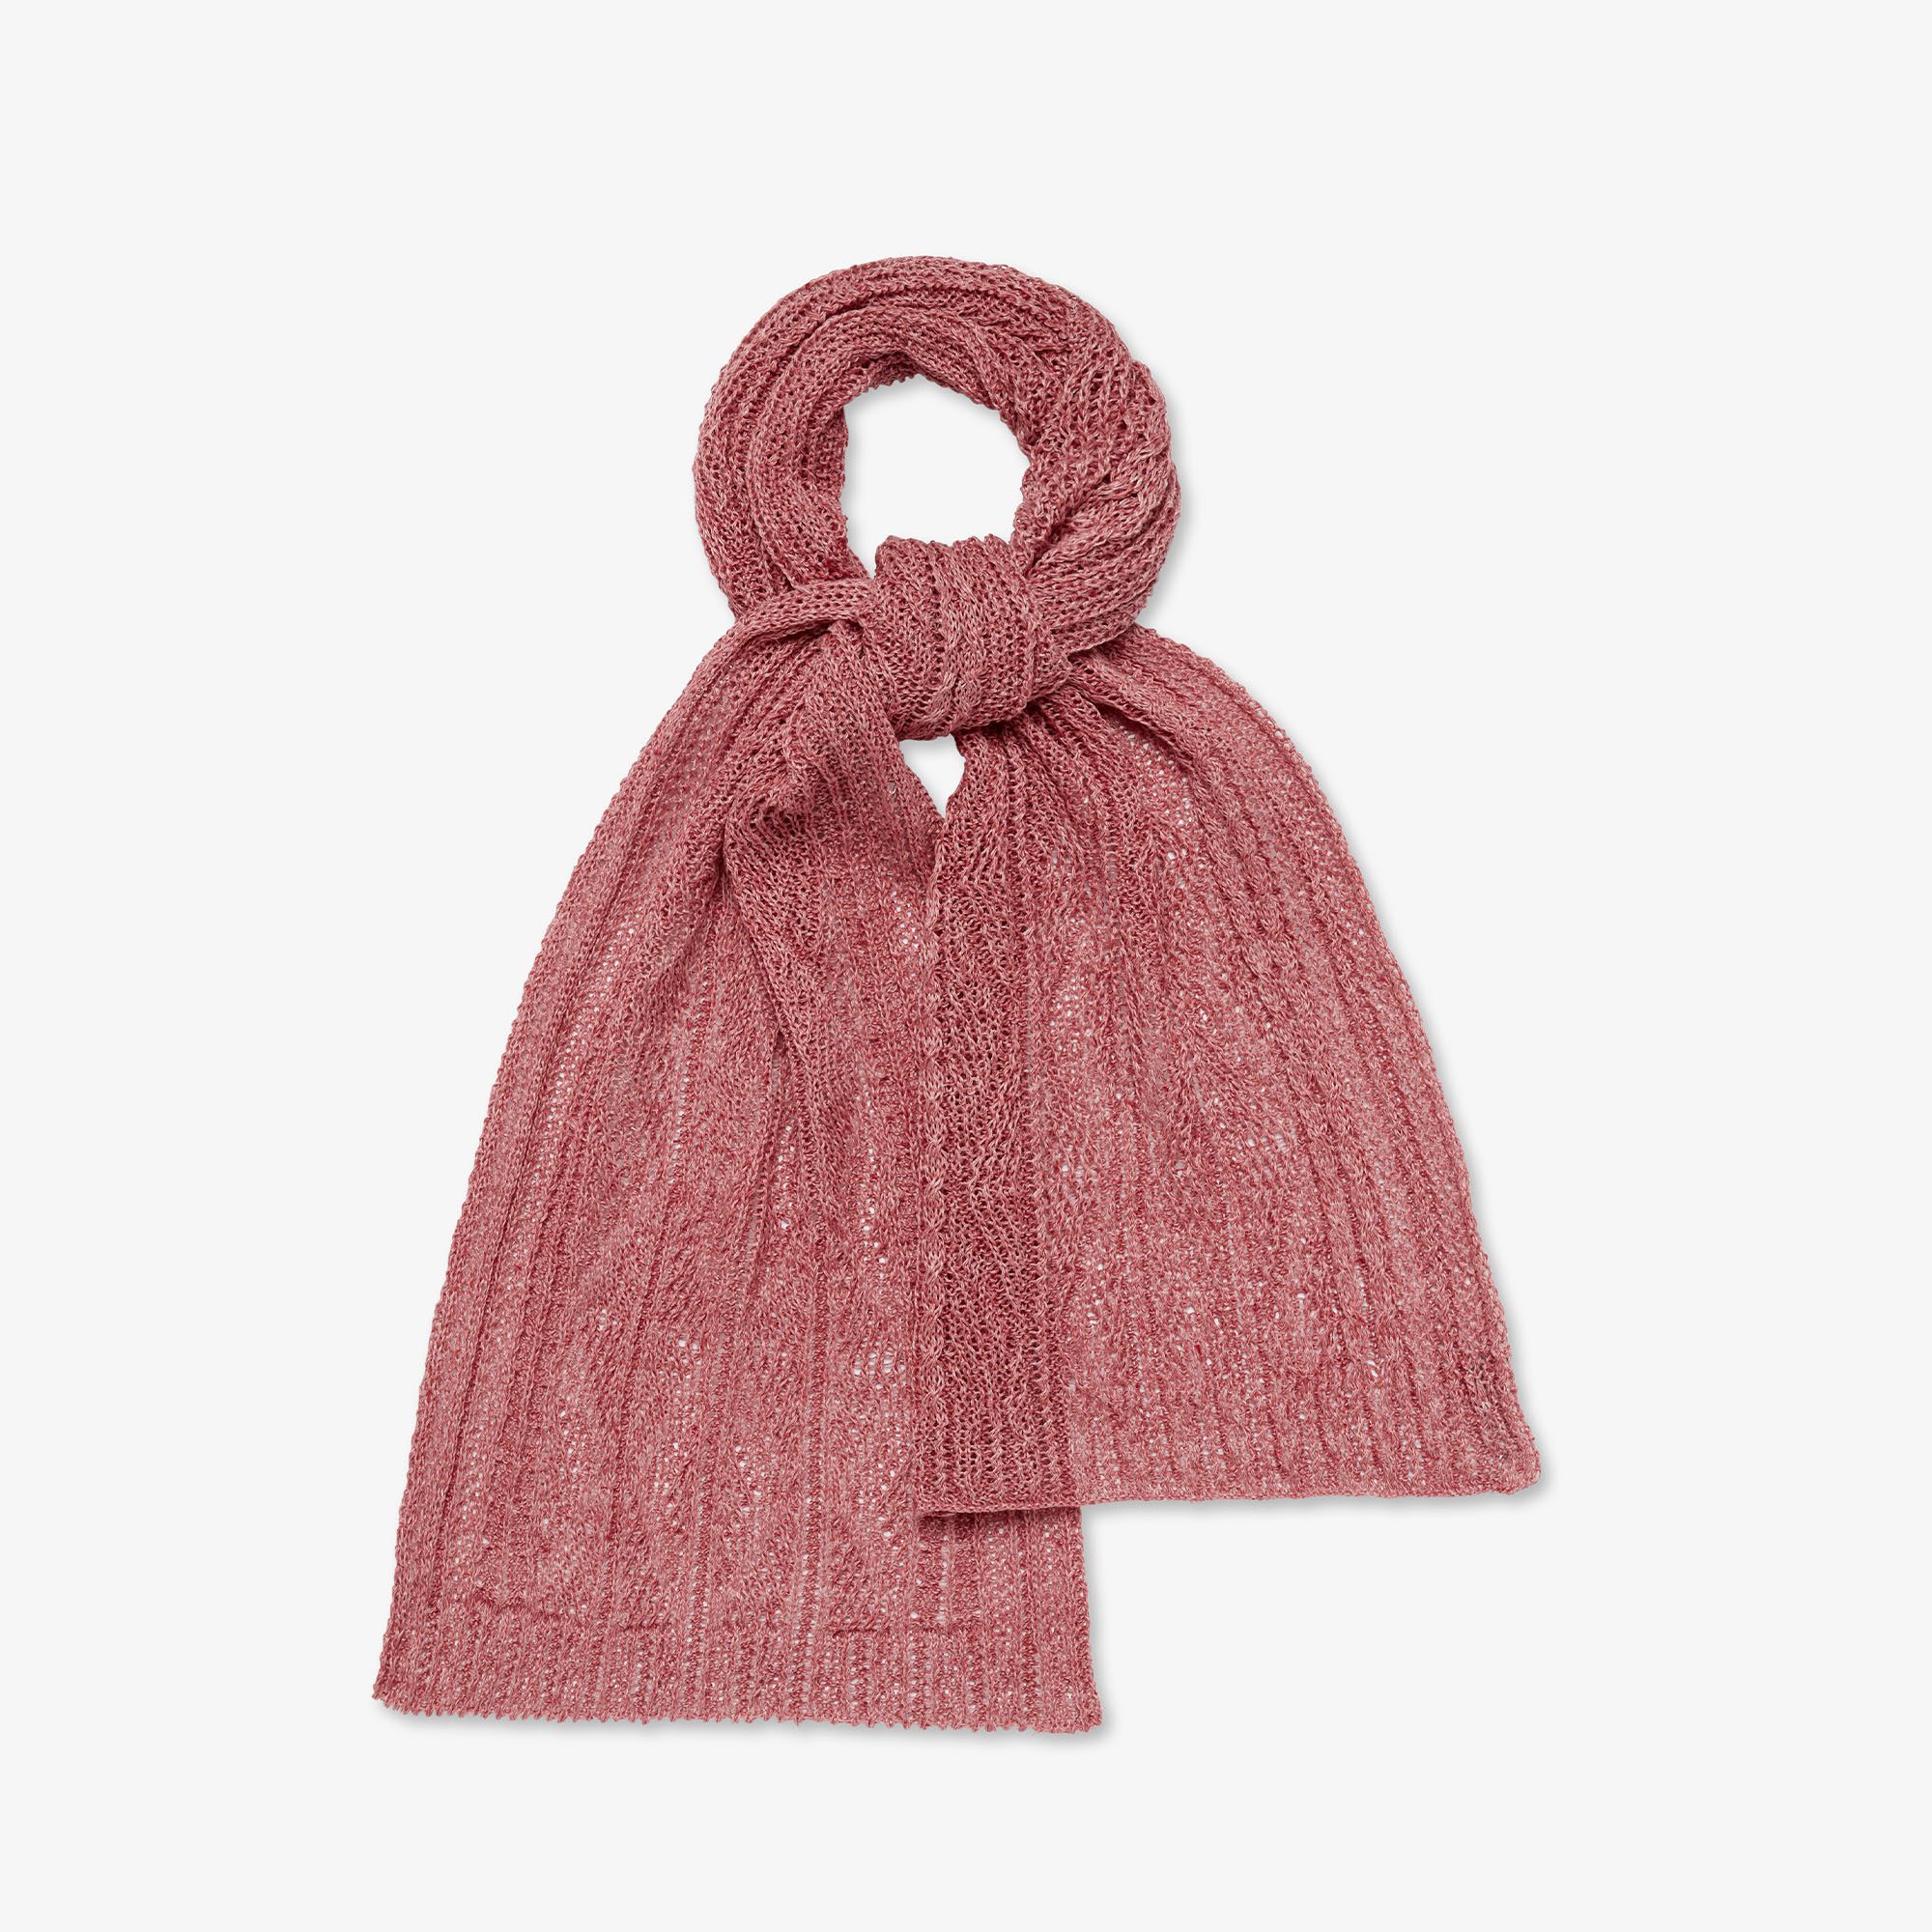 https://inismeain.ie/wp-content/uploads/2023/03/A00278_Inis_Meain_Patented_Aran_Scarf_Pink_Marl_1x1_Product_1.jpg